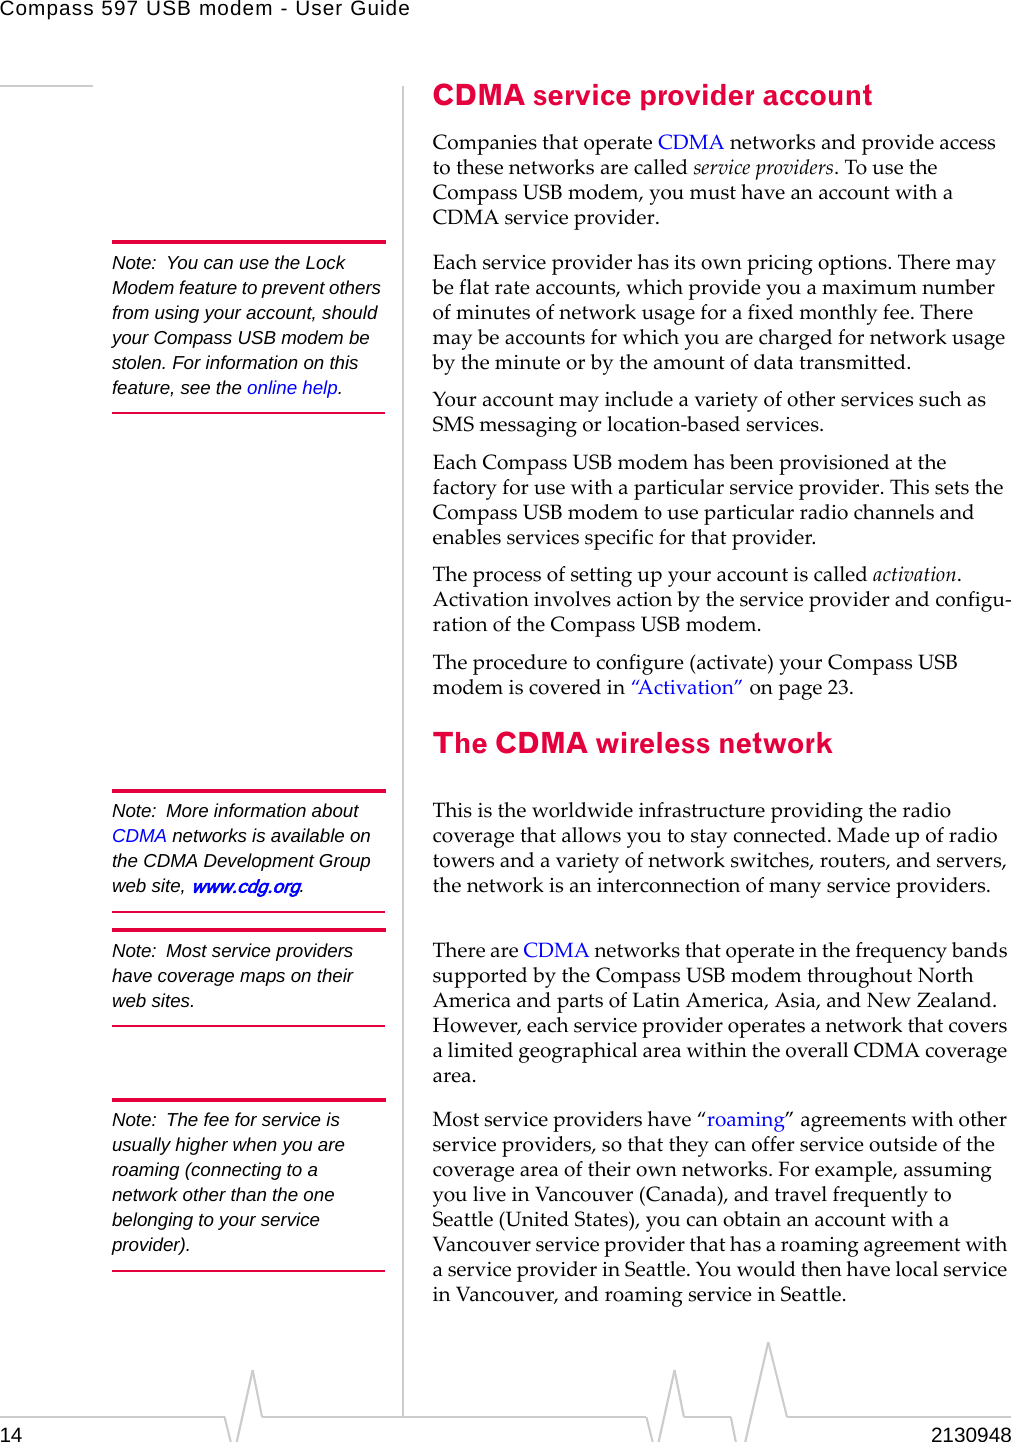 Compass 597 USB modem - User Guide14 2130948CDMA service provider accountCompaniesthatoperateCDMAnetworksandprovideaccesstothesenetworksarecalledserviceproviders.TousetheCompassUSBmodem,youmusthaveanaccountwithaCDMAserviceprovider.Note: You can use the Lock Modem feature to prevent others from using your account, should your Compass USB modem be stolen. For information on this feature, see the online help.Eachserviceproviderhasitsownpricingoptions.Theremaybeflatrateaccounts,whichprovideyouamaximumnumberofminutesofnetworkusageforafixedmonthlyfee.Theremaybeaccountsforwhichyouarechargedfornetworkusagebytheminuteorbytheamountofdatatransmitted.YouraccountmayincludeavarietyofotherservicessuchasSMSmessagingorlocation‐basedservices.EachCompassUSBmodemhasbeenprovisionedatthefactoryforusewithaparticularserviceprovider.ThissetstheCompassUSBmodemtouseparticularradiochannelsandenablesservicesspecificforthatprovider.Theprocessofsettingupyouraccountiscalledactivation.Activationinvolvesactionbytheserviceproviderandconfigu‐rationoftheCompassUSBmodem.Theproceduretoconfigure(activate)yourCompassUSBmodemiscoveredin“Activation”onpage 23.The CDMA wireless networkNote: More information about CDMA networks is available on the CDMA Development Group web site, www.cdg.org.Thisistheworldwideinfrastructureprovidingtheradiocoveragethatallowsyoutostayconnected.Madeupofradiotowersandavarietyofnetworkswitches,routers,andservers,thenetworkisaninterconnectionofmanyserviceproviders.Note: Most service providers have coverage maps on their web sites.ThereareCDMAnetworksthatoperateinthefrequencybandssupportedbytheCompassUSBmodemthroughoutNorthAmericaandpartsofLatinAmerica,Asia,andNewZealand.However,eachserviceprovideroperatesanetworkthatcoversalimitedgeographicalareawithintheoverallCDMAcoveragearea.Note: The fee for service is usually higher when you are roaming (connecting to a network other than the one belonging to your service provider).Mostserviceprovidershave“roaming”agreementswithotherserviceproviders,sothattheycanofferserviceoutsideofthecoverageareaoftheirownnetworks.Forexample,assumingyouliveinVancouver(Canada),andtravelfrequentlytoSeattle(UnitedStates),youcanobtainanaccountwithaVancouverserviceproviderthathasaroamingagreementwithaserviceproviderinSeattle.YouwouldthenhavelocalserviceinVancouver,androamingserviceinSeattle.